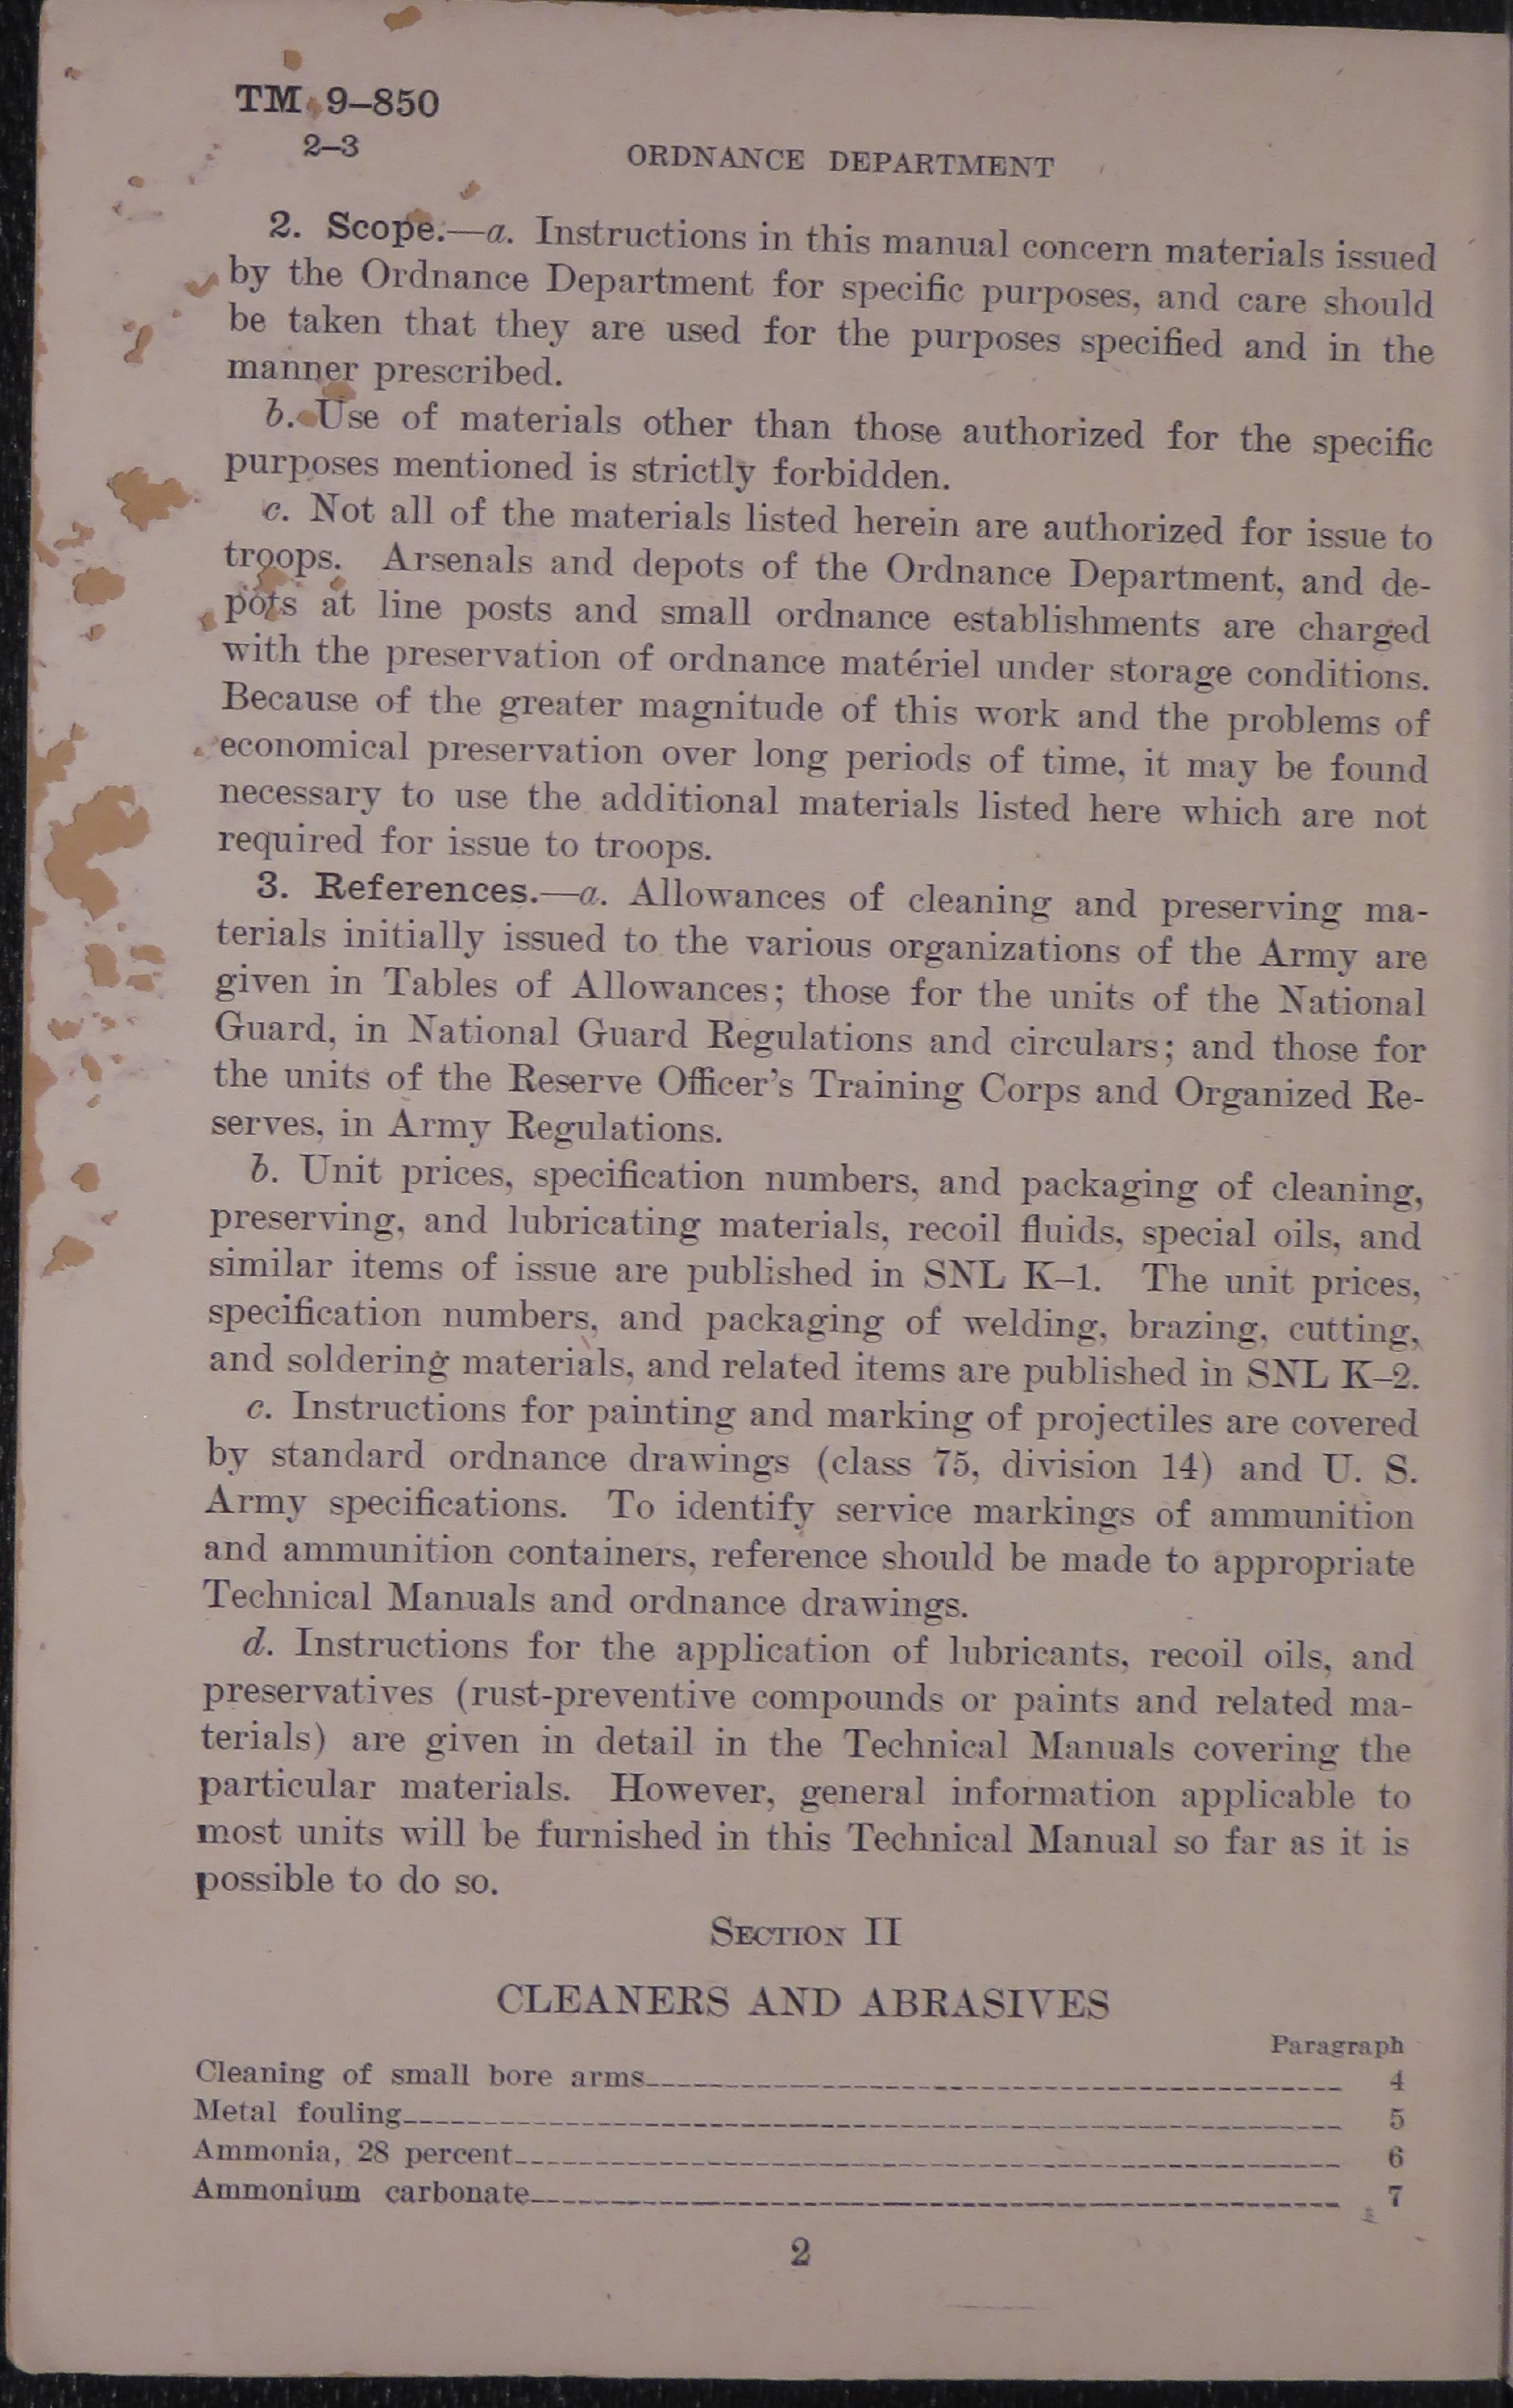 Sample page 4 from AirCorps Library document: Cleaning, Preserving, Lubricating, Welding Materials, and Similar Items Issued by the Ordinance Department